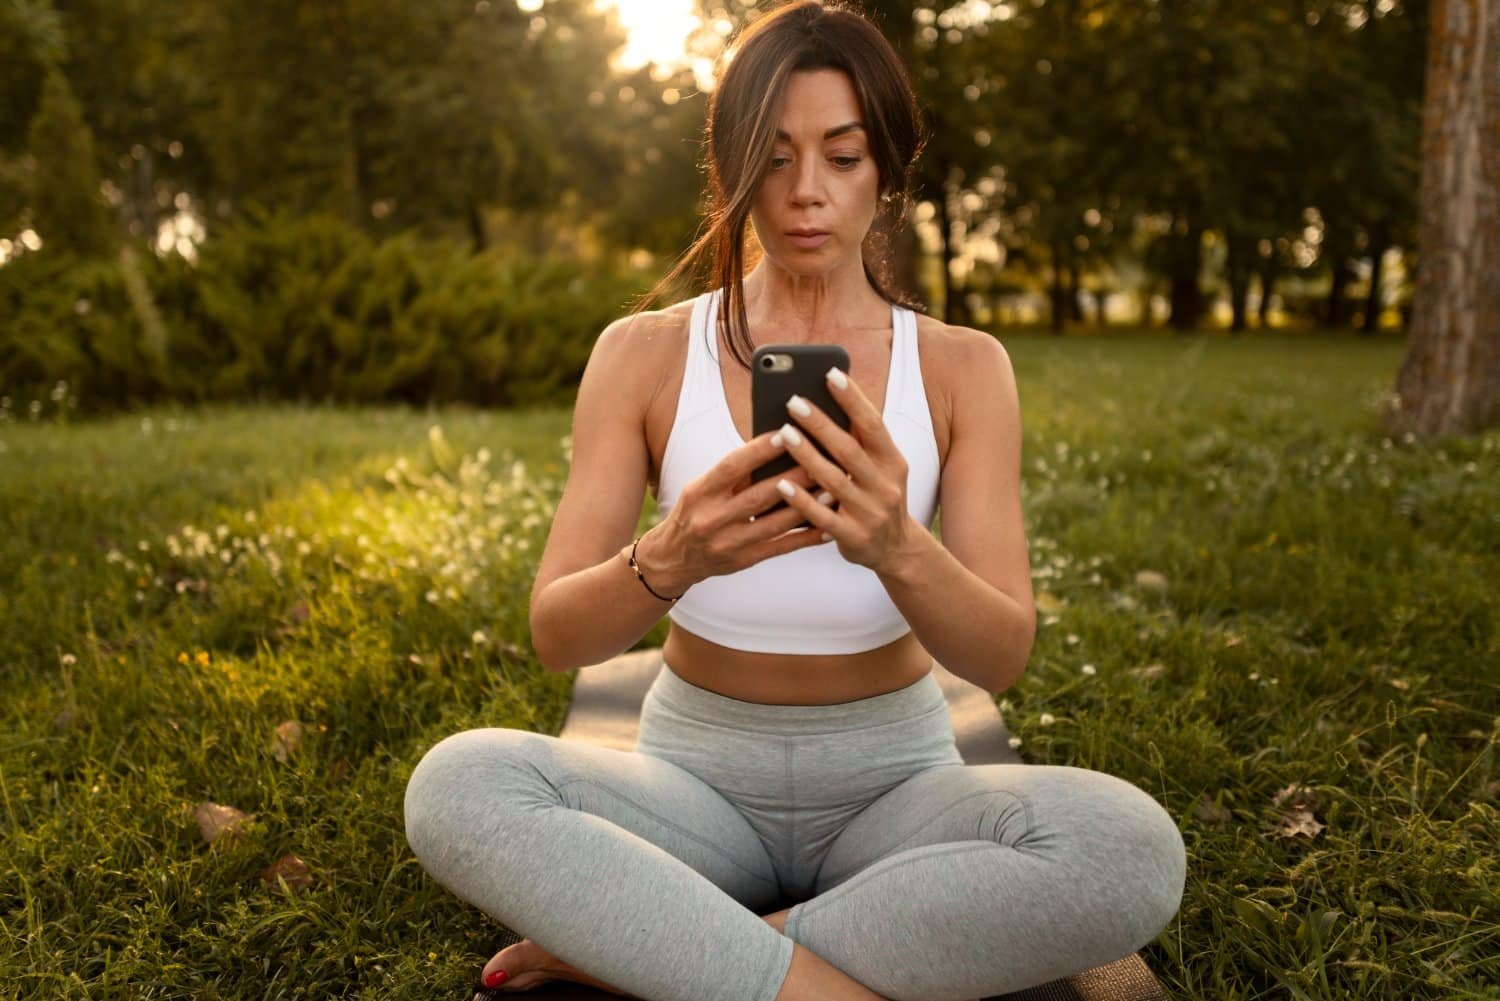 Mobile Phones and Mental Health: Finding Balance